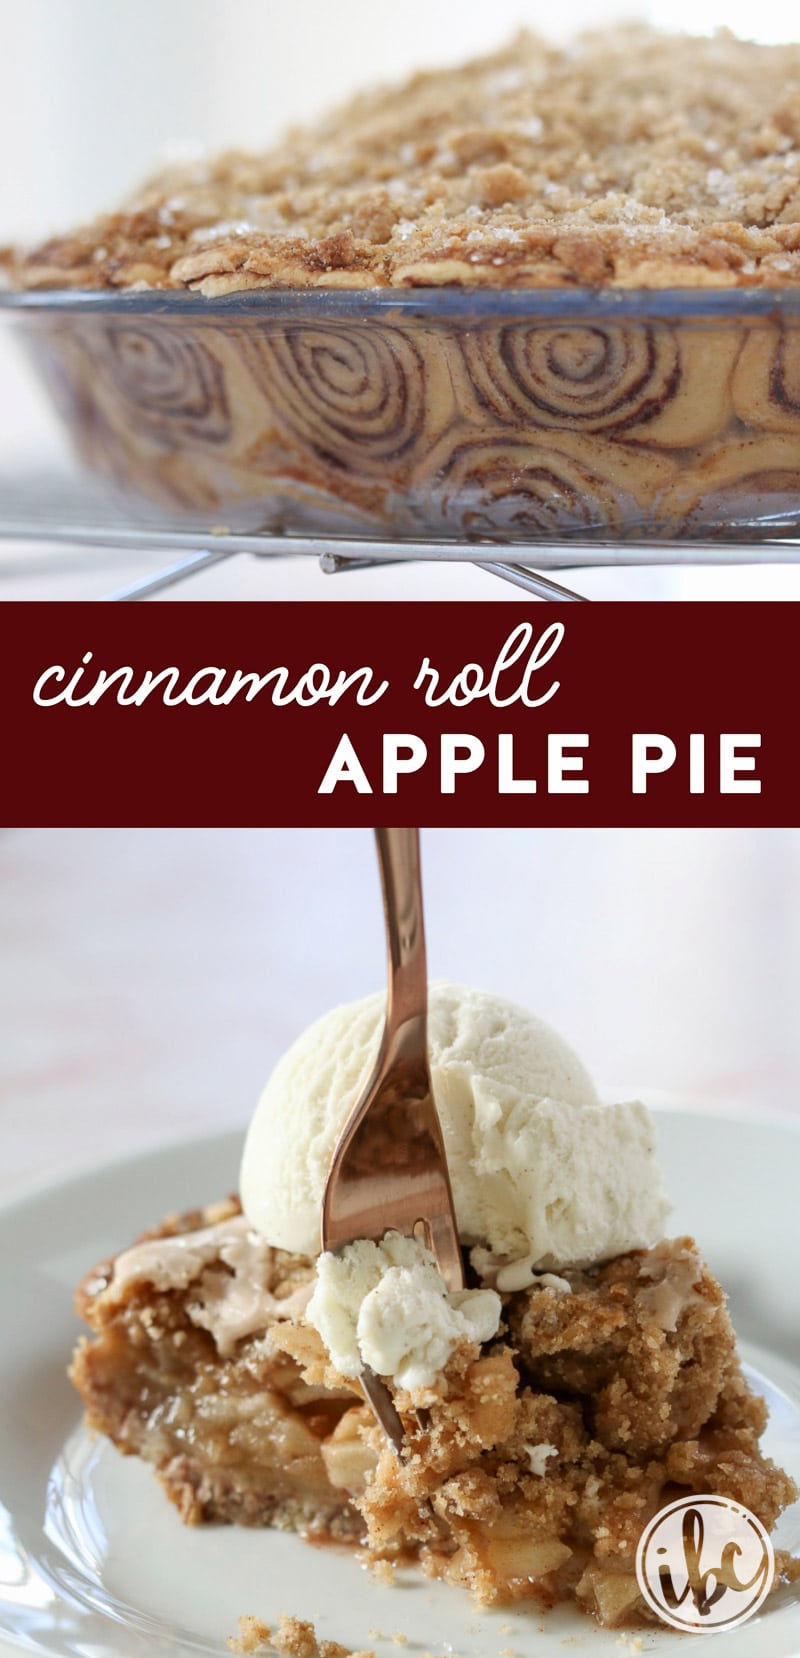 This Cinnamon Roll Apple Pie is a unique take on a classic apple pie. Made with a cinnamon roll inspired crust it looks as delicious as it tastes! #cinnamon #roll #apple #pie #dessert #recipe